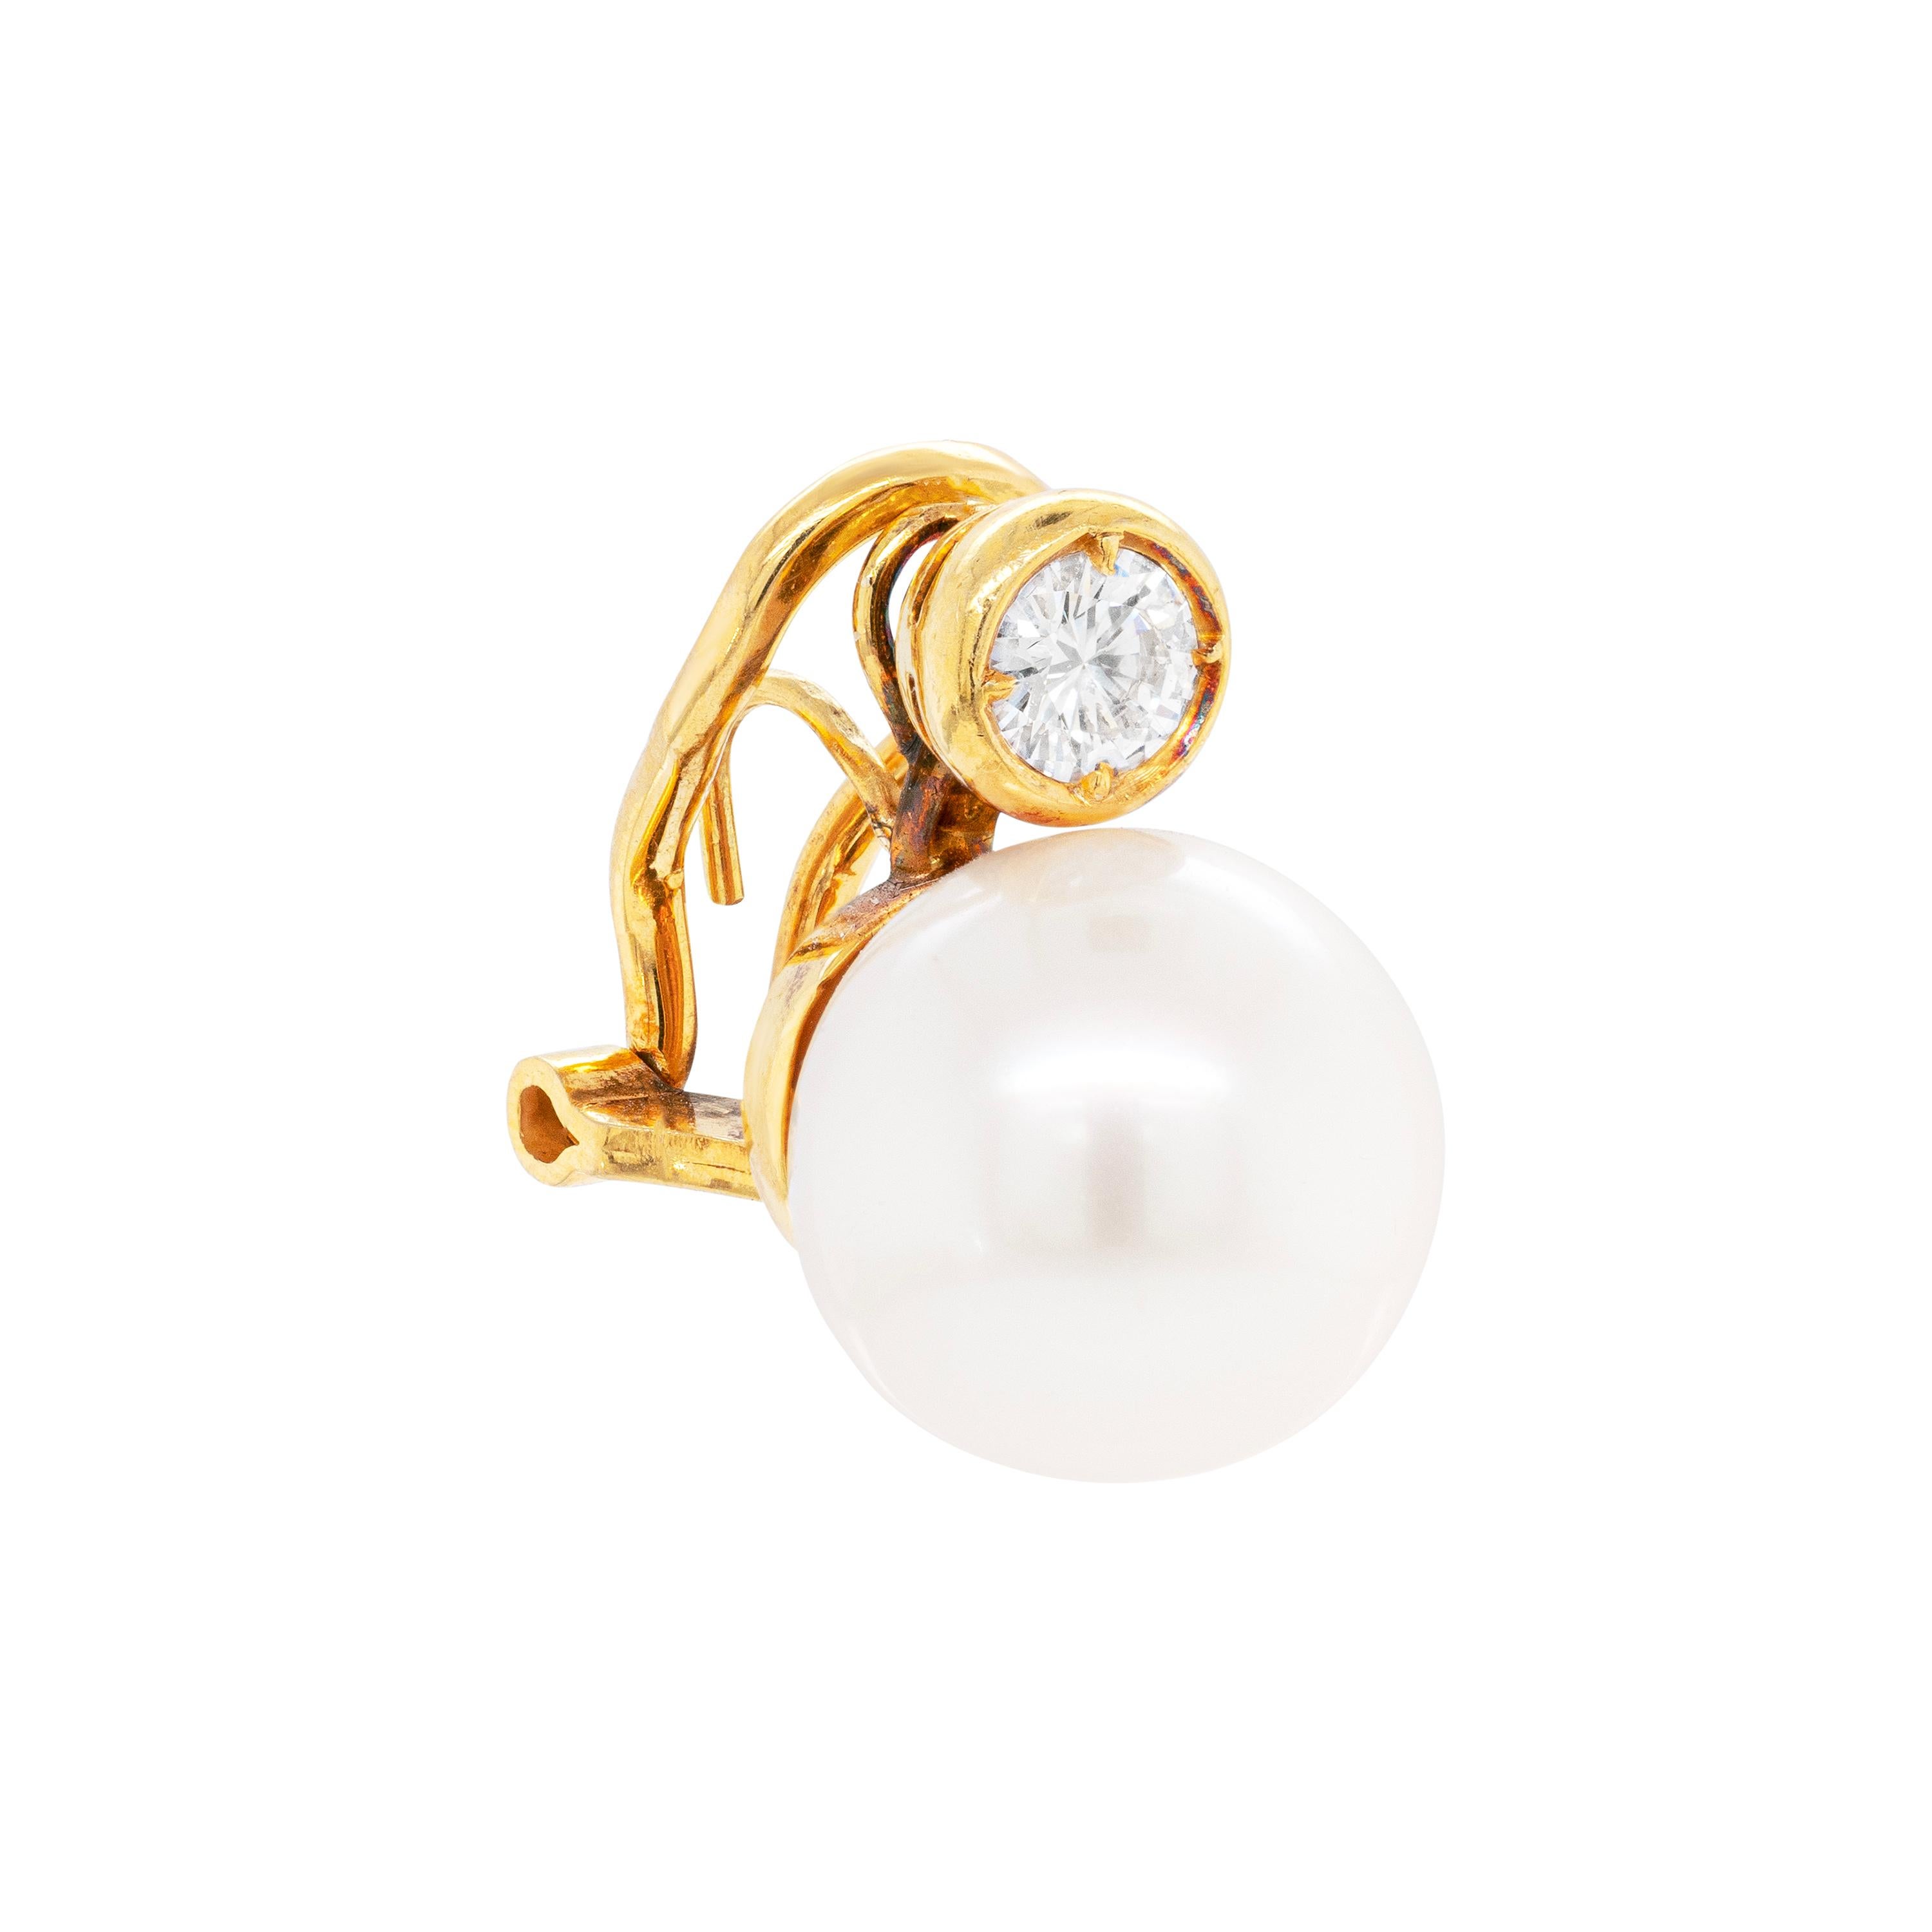 Beautifully elegant dress earrings featuring a cultured white South Sea pearl approximately measuring 11.5mm in diameter accompanied by a fine quality round brilliant cut diamond on top weighing approximately 0.30ct each in 18ct gold rub-over